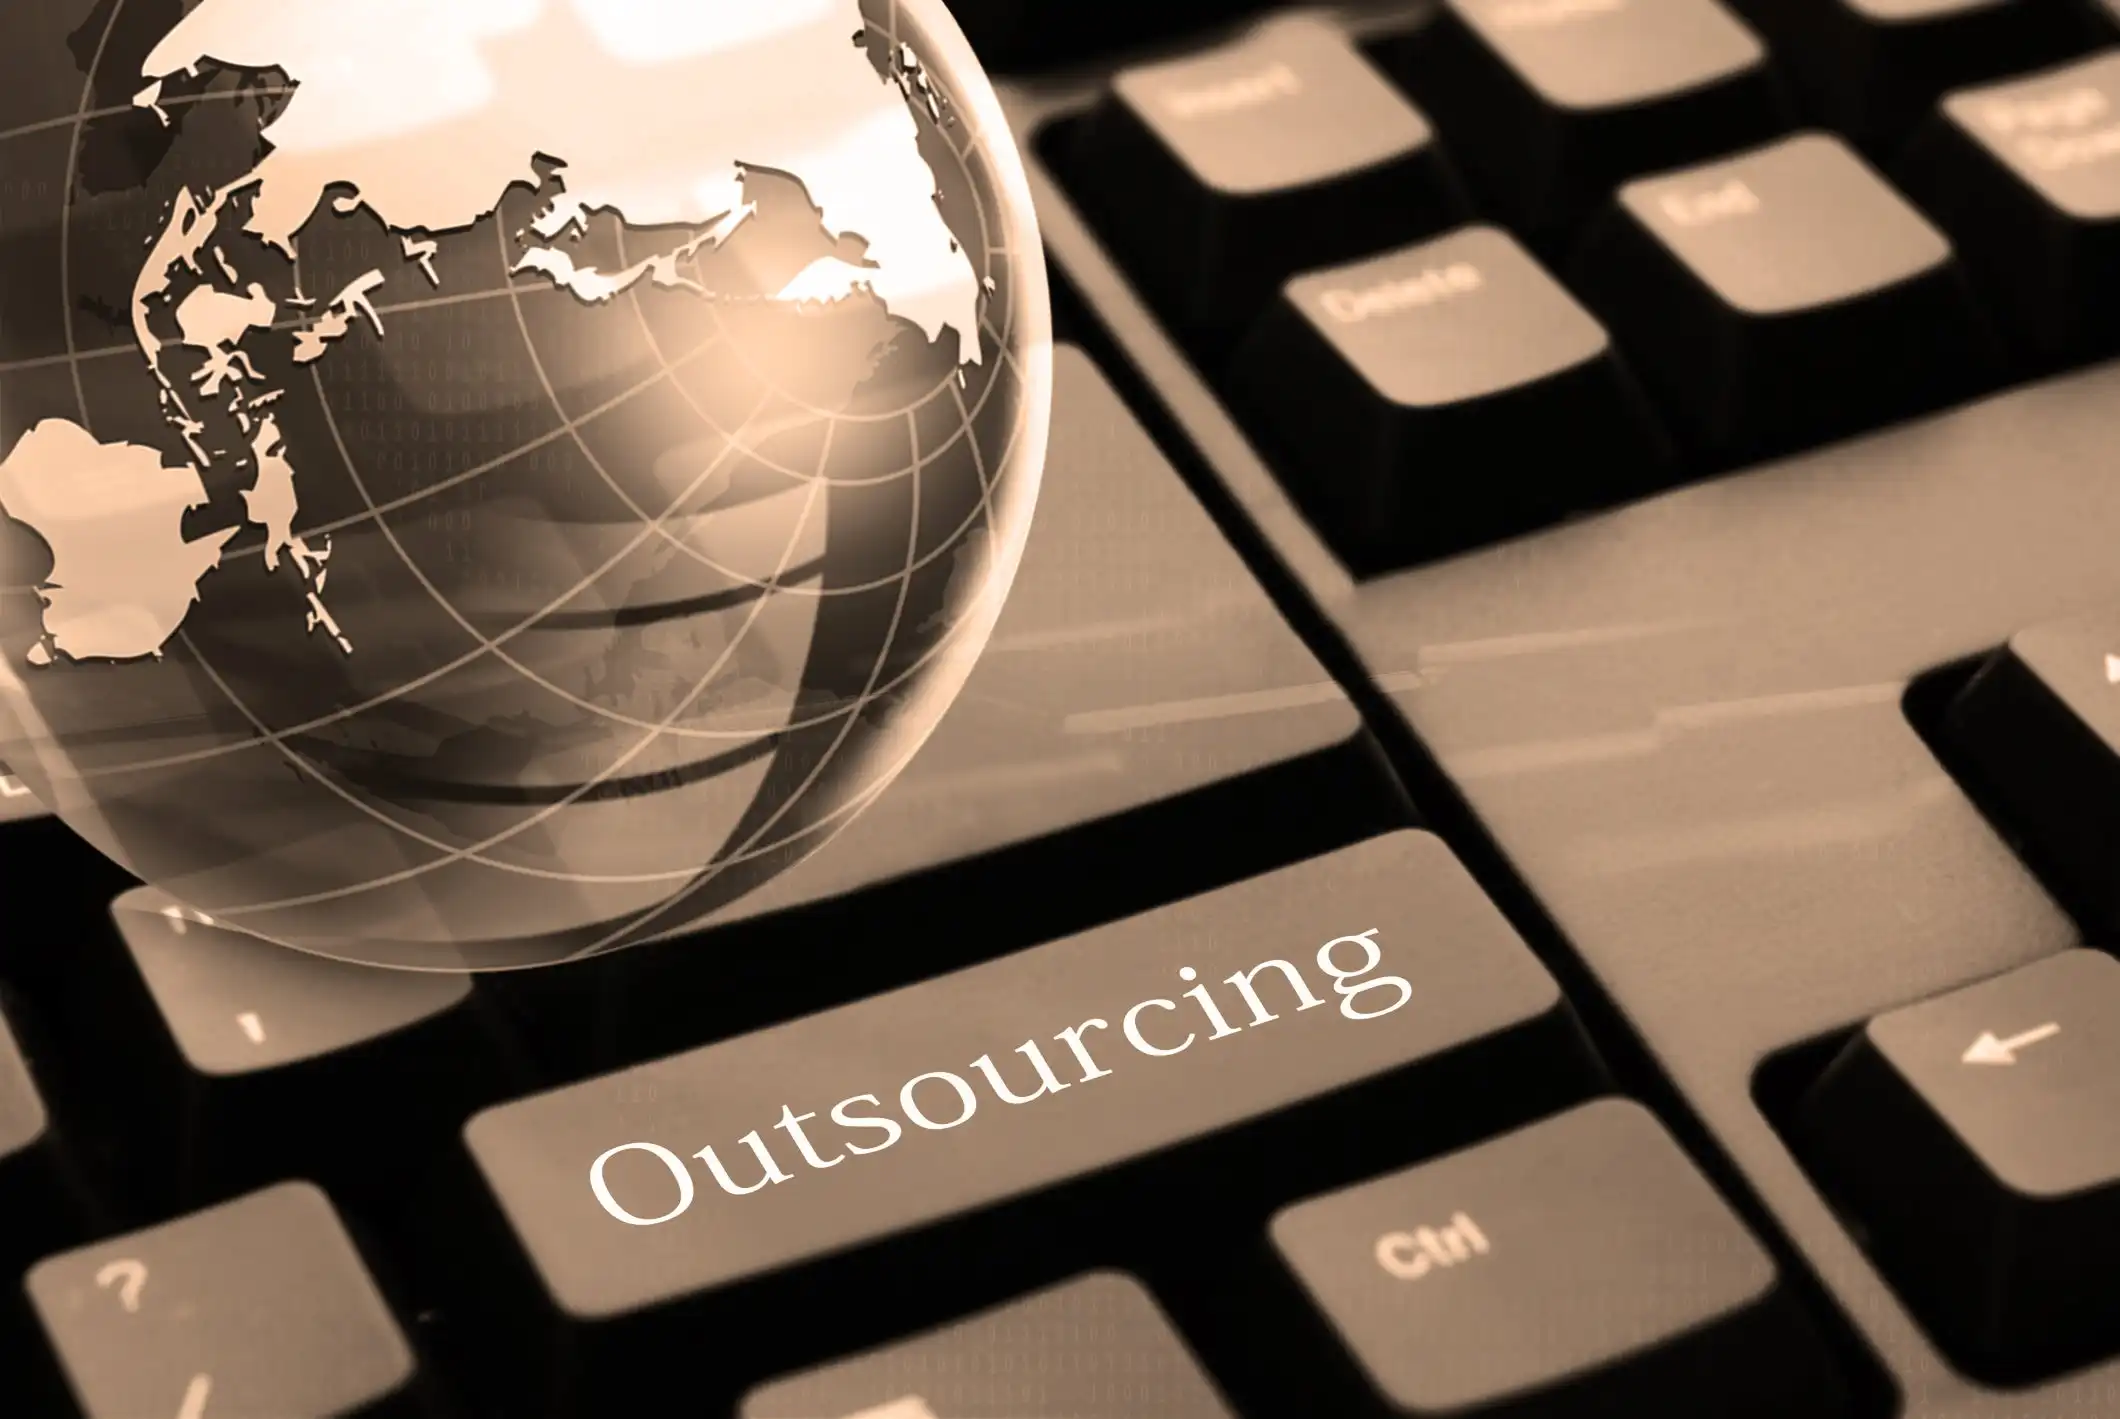 Considerations for Outsourcing: